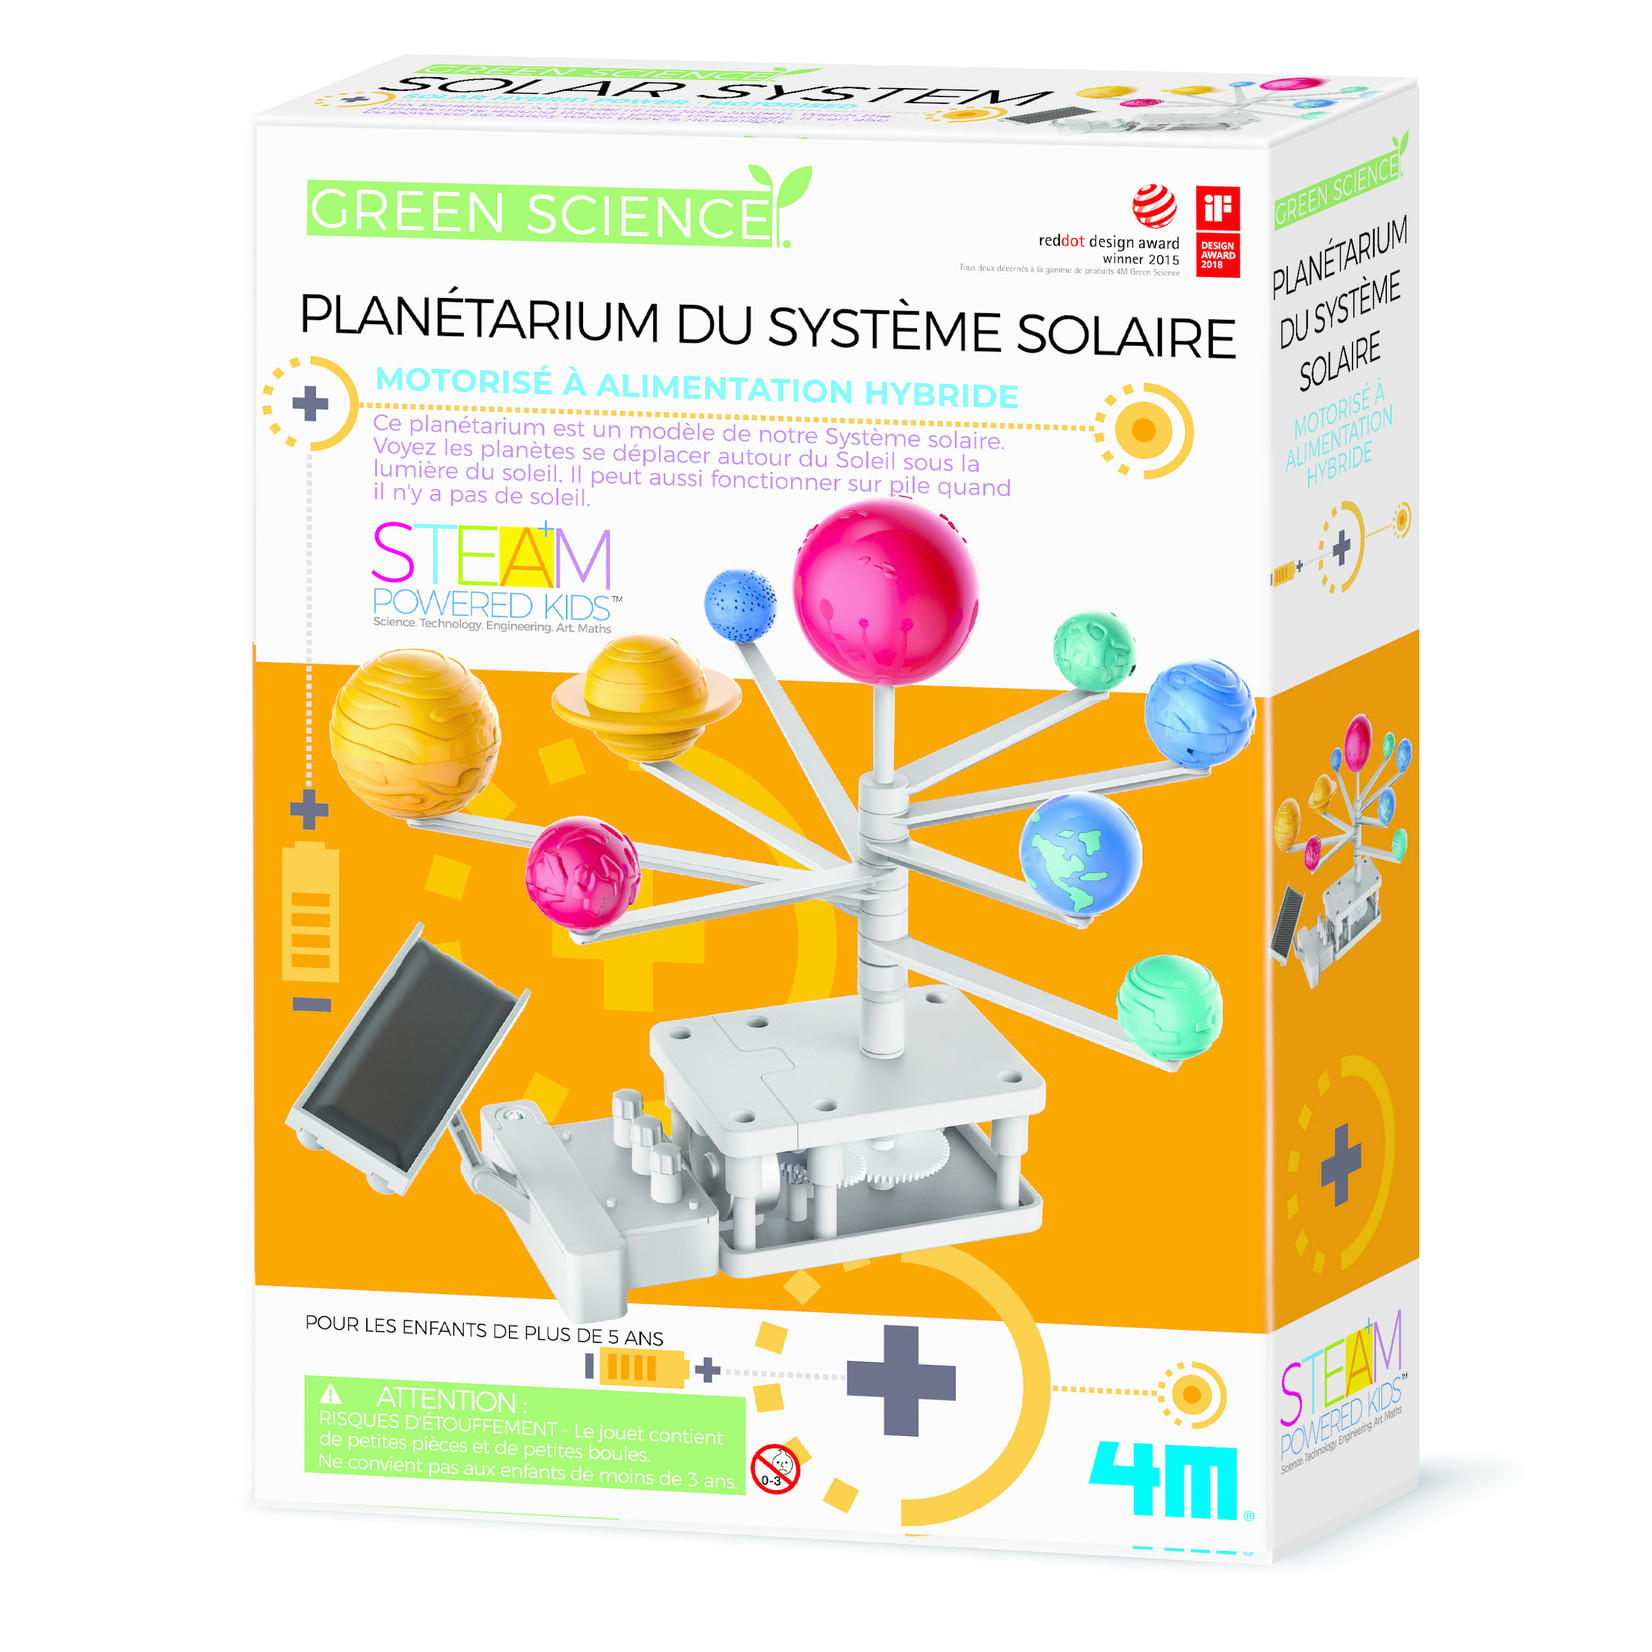 Aviation and Space Green Science - Planetarium du system solaire